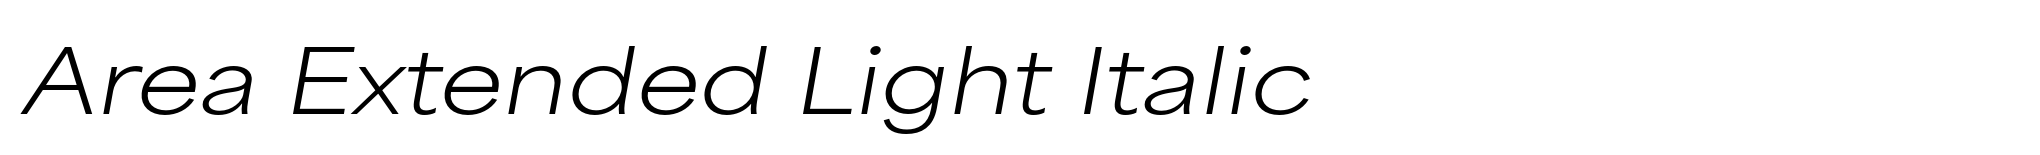 Area Extended Light Italic image